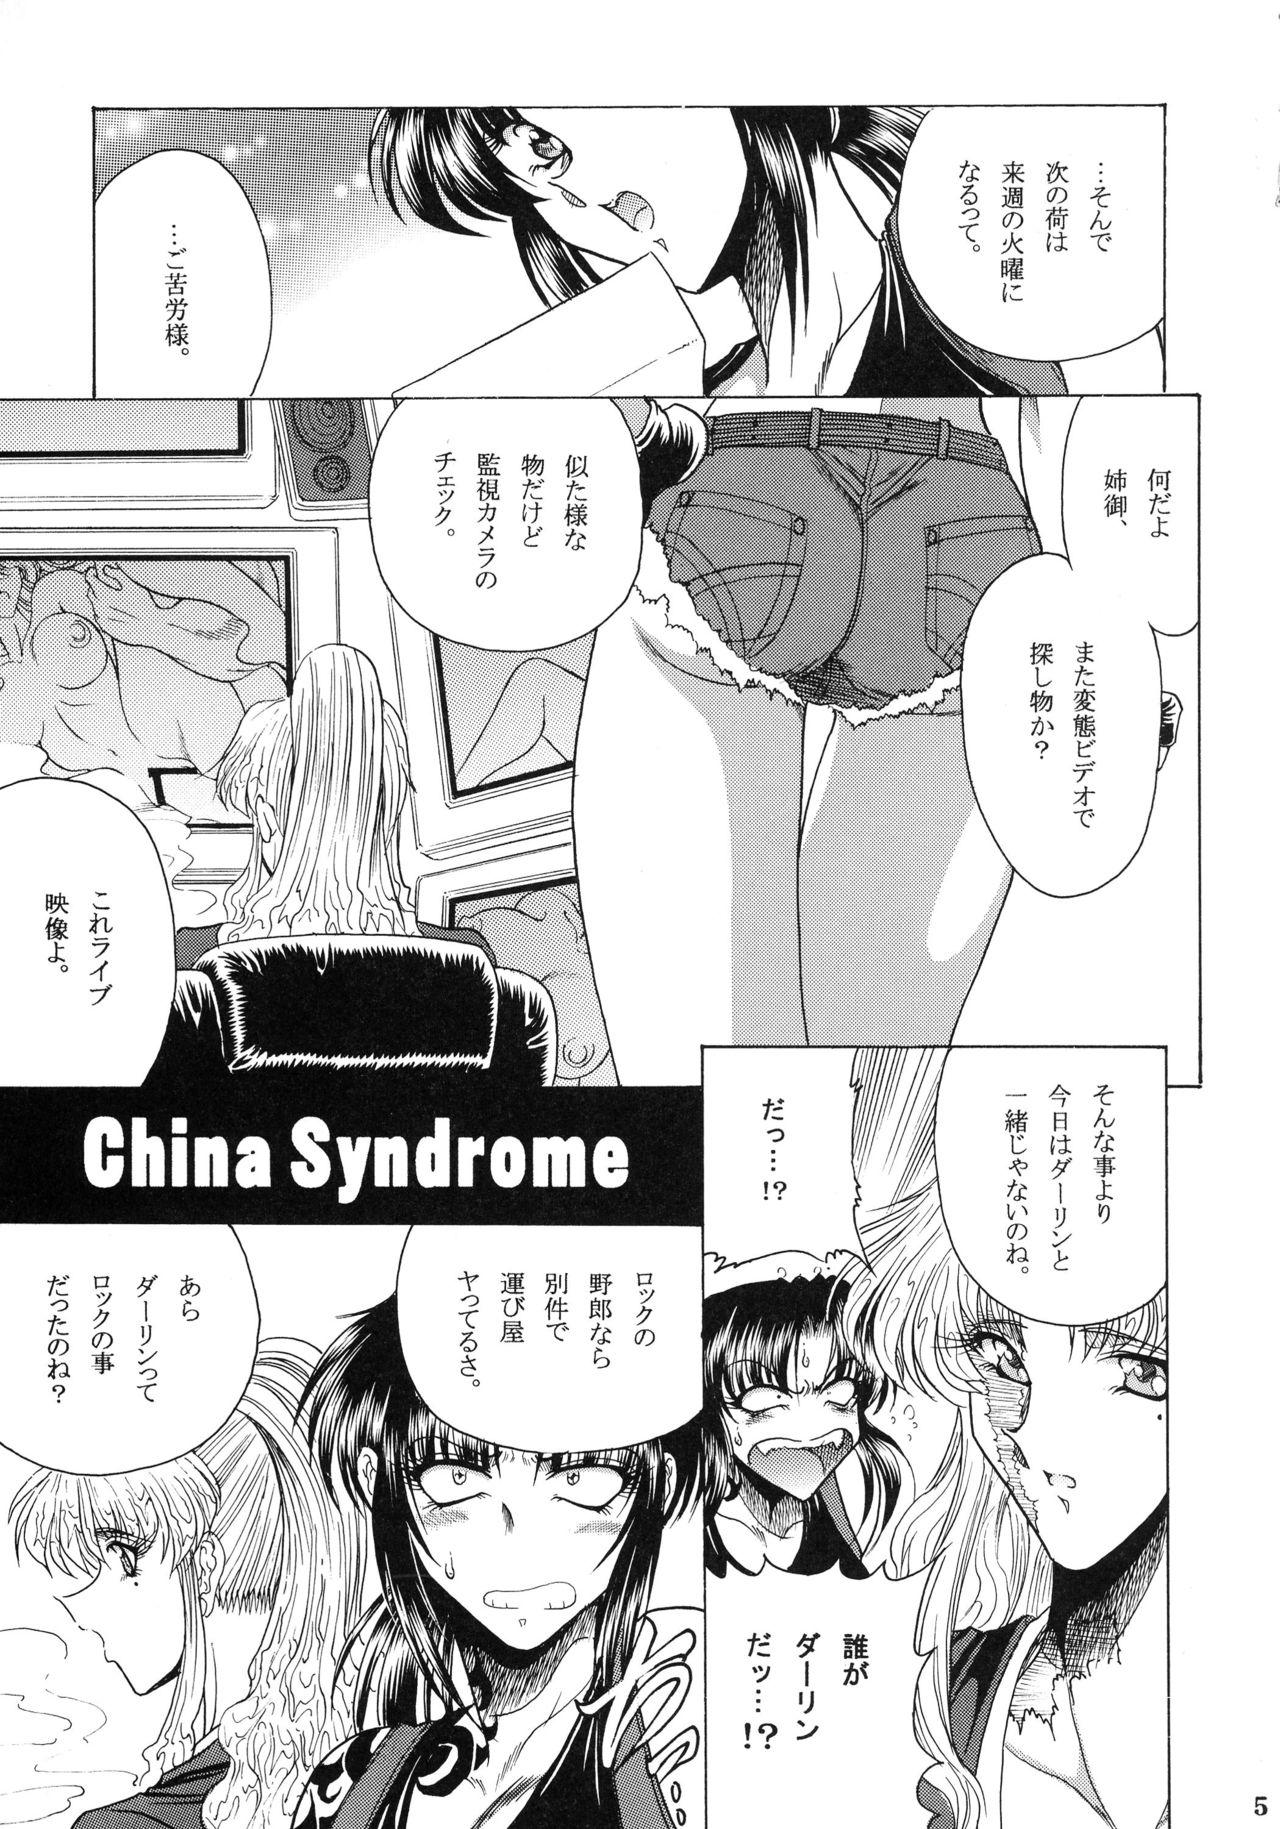 Swallow ZONE 38 China Syndrome - Black lagoon Chaturbate - Page 4